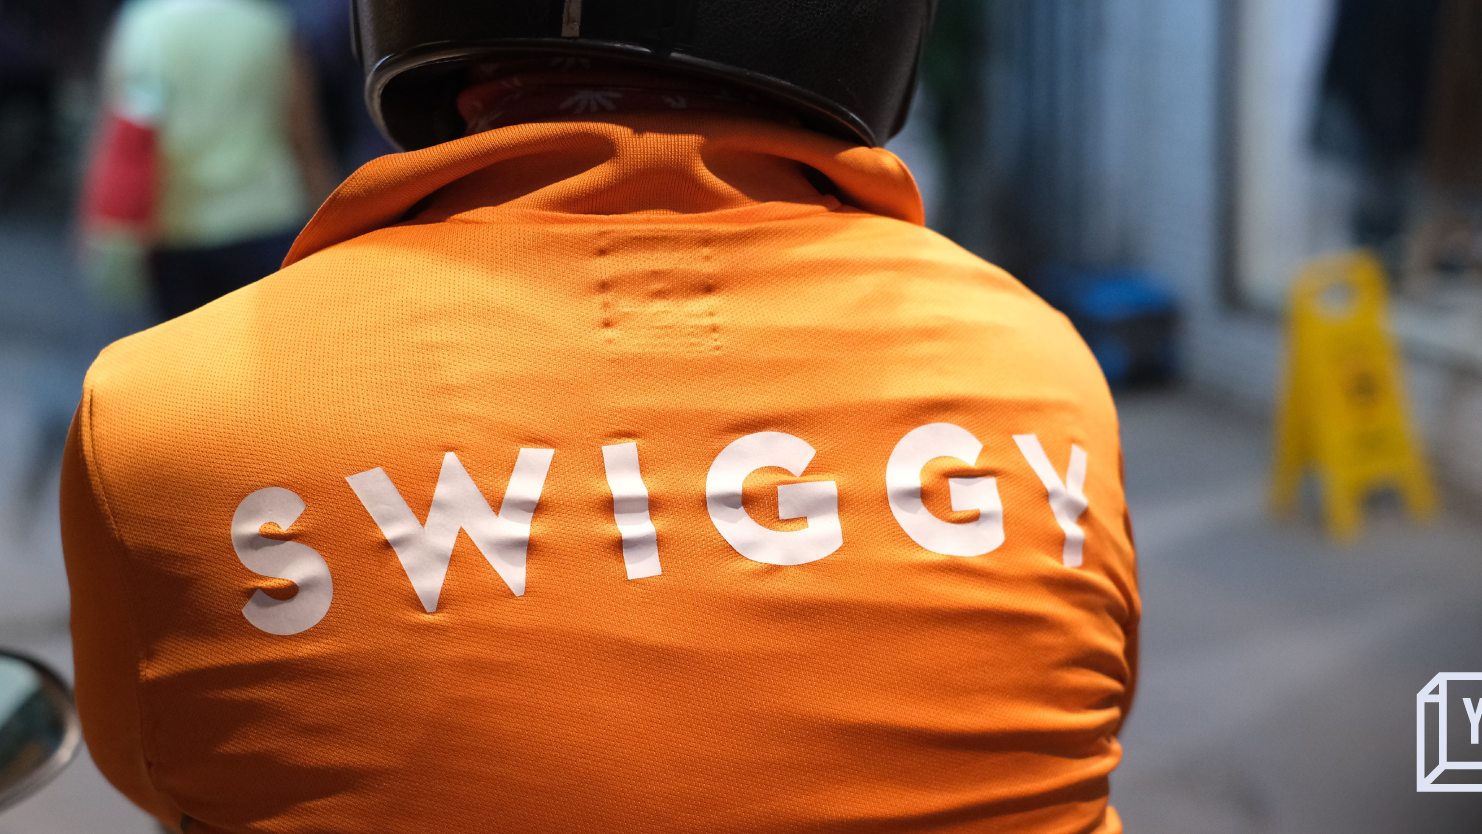 Swiggy to file confidential papers with SEBI for $1.2B IPO